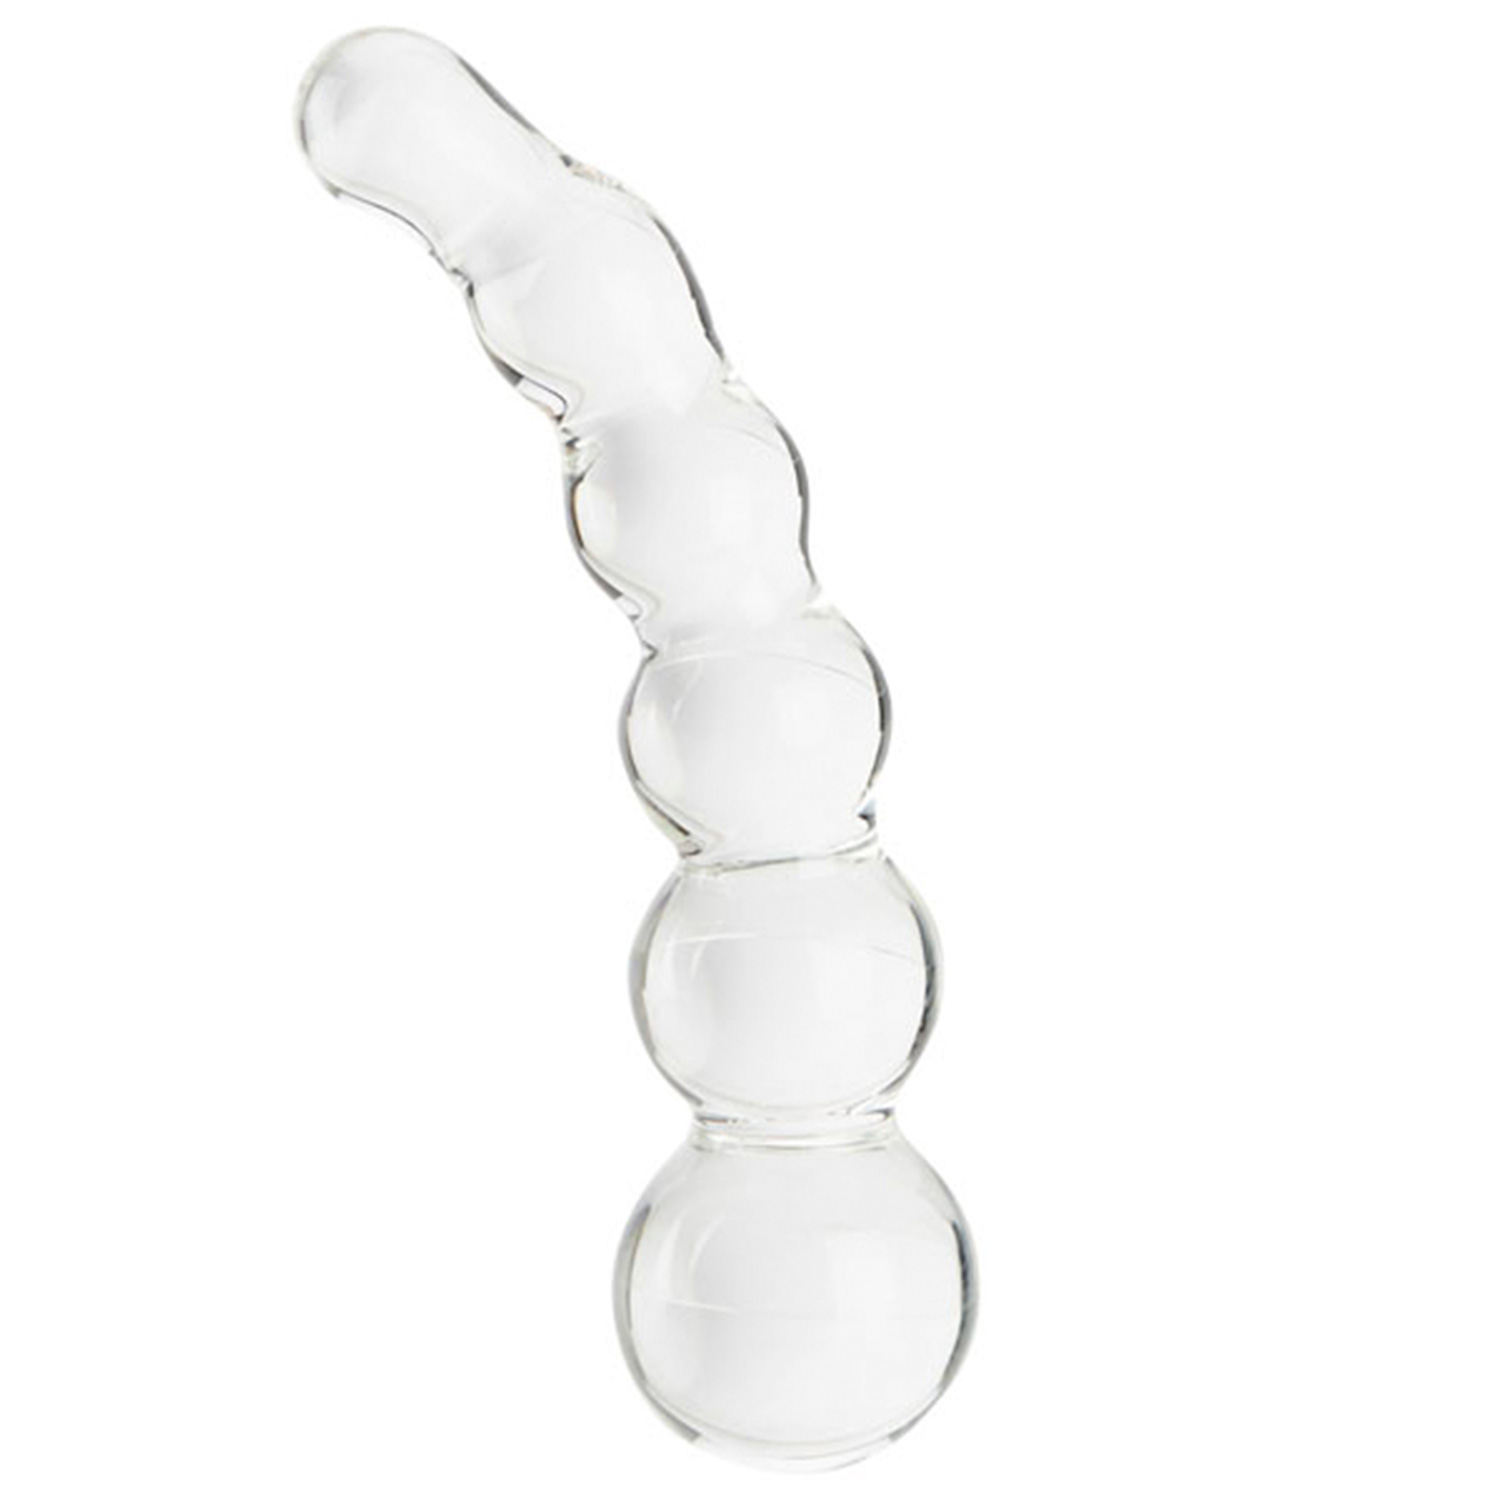 Sinful Groove Glas Dildo - Clear